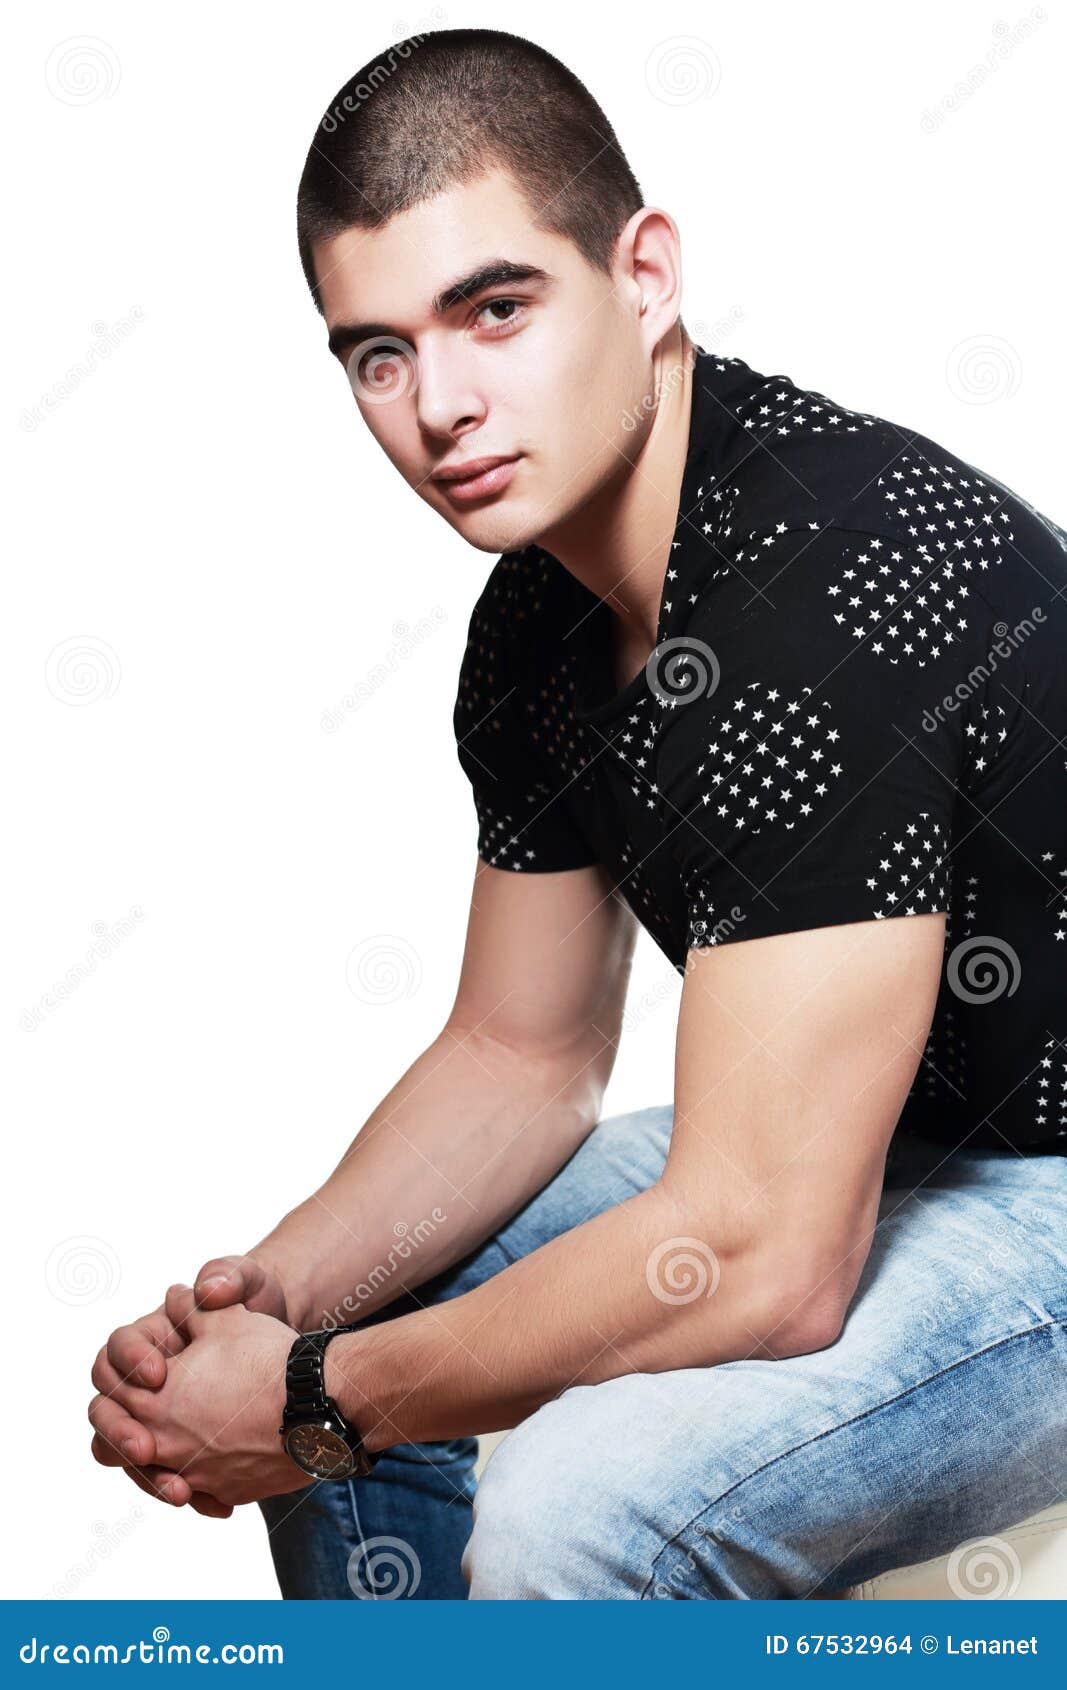 Young man sitting pose stock photo. Image of adults, adult - 67532964